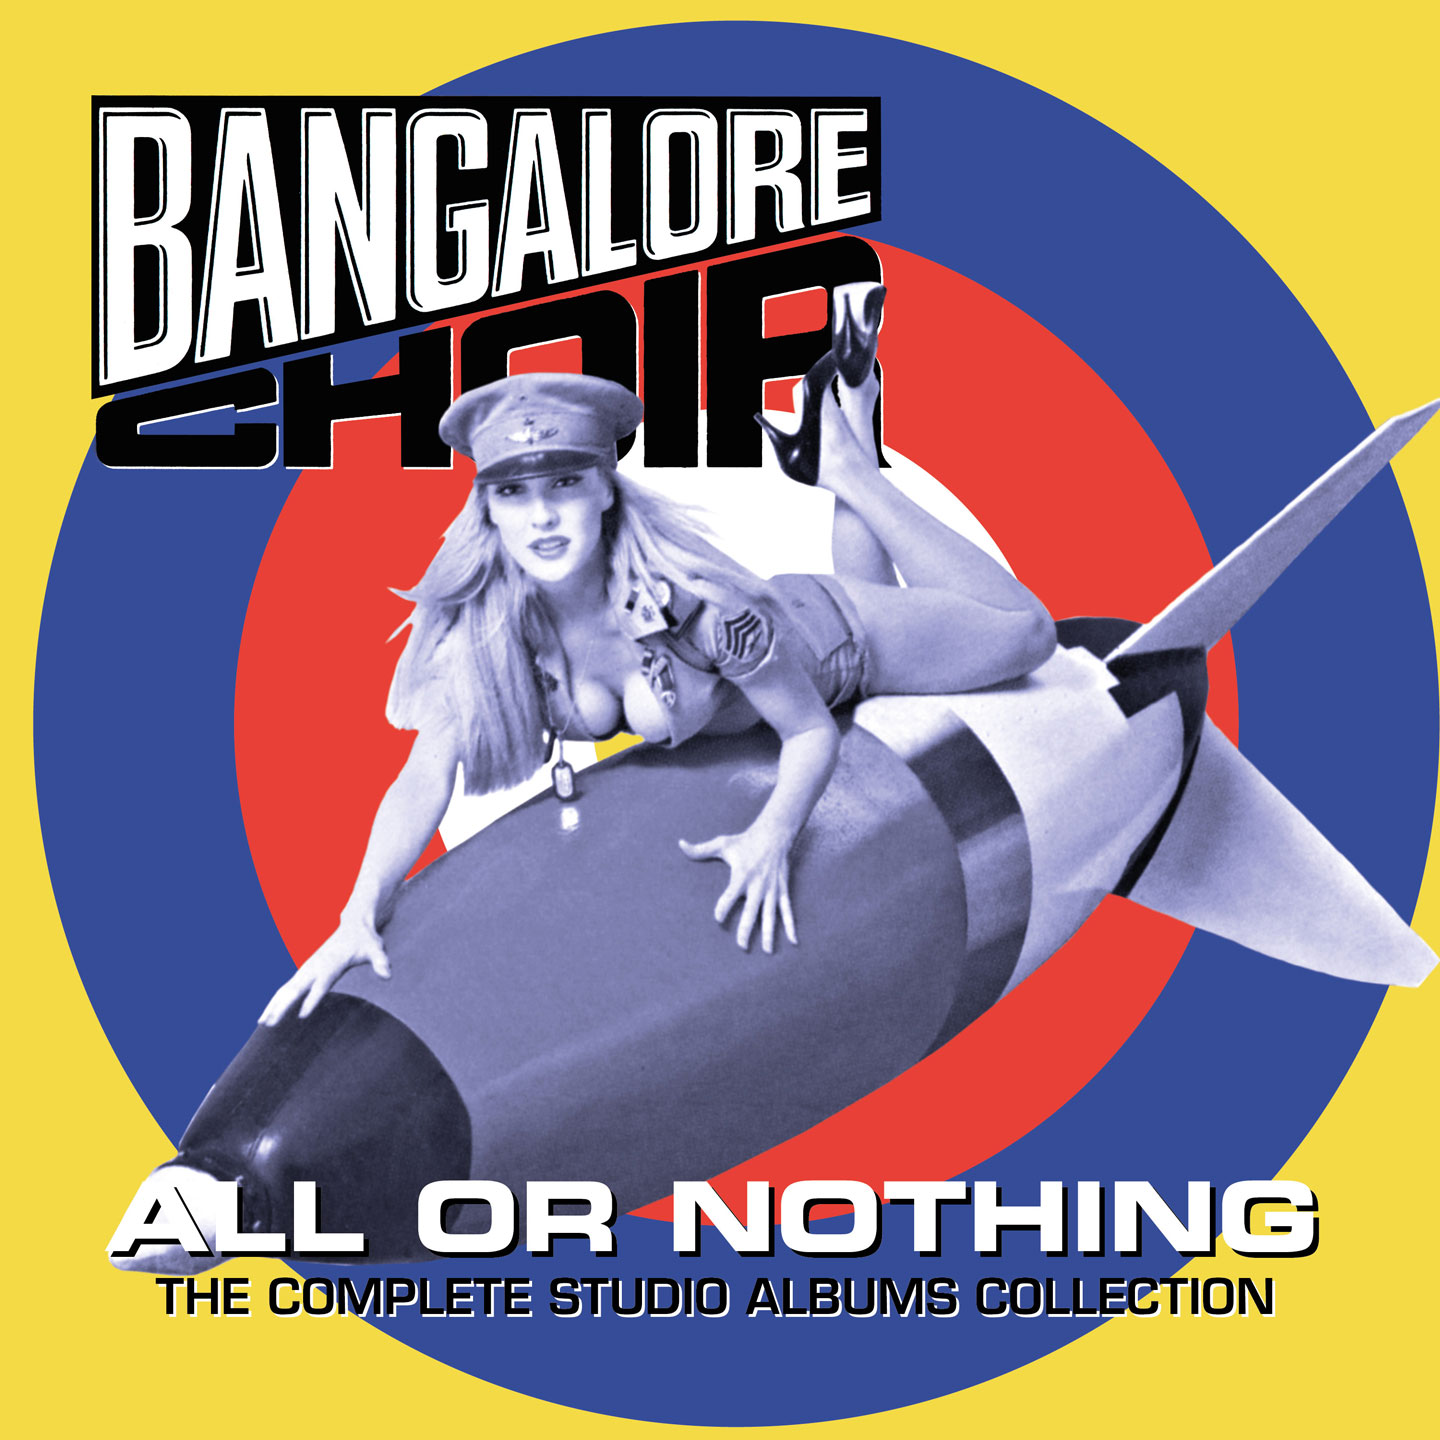 Bangalore Choir 'All Or Nothing' Box Set OUT NOW!